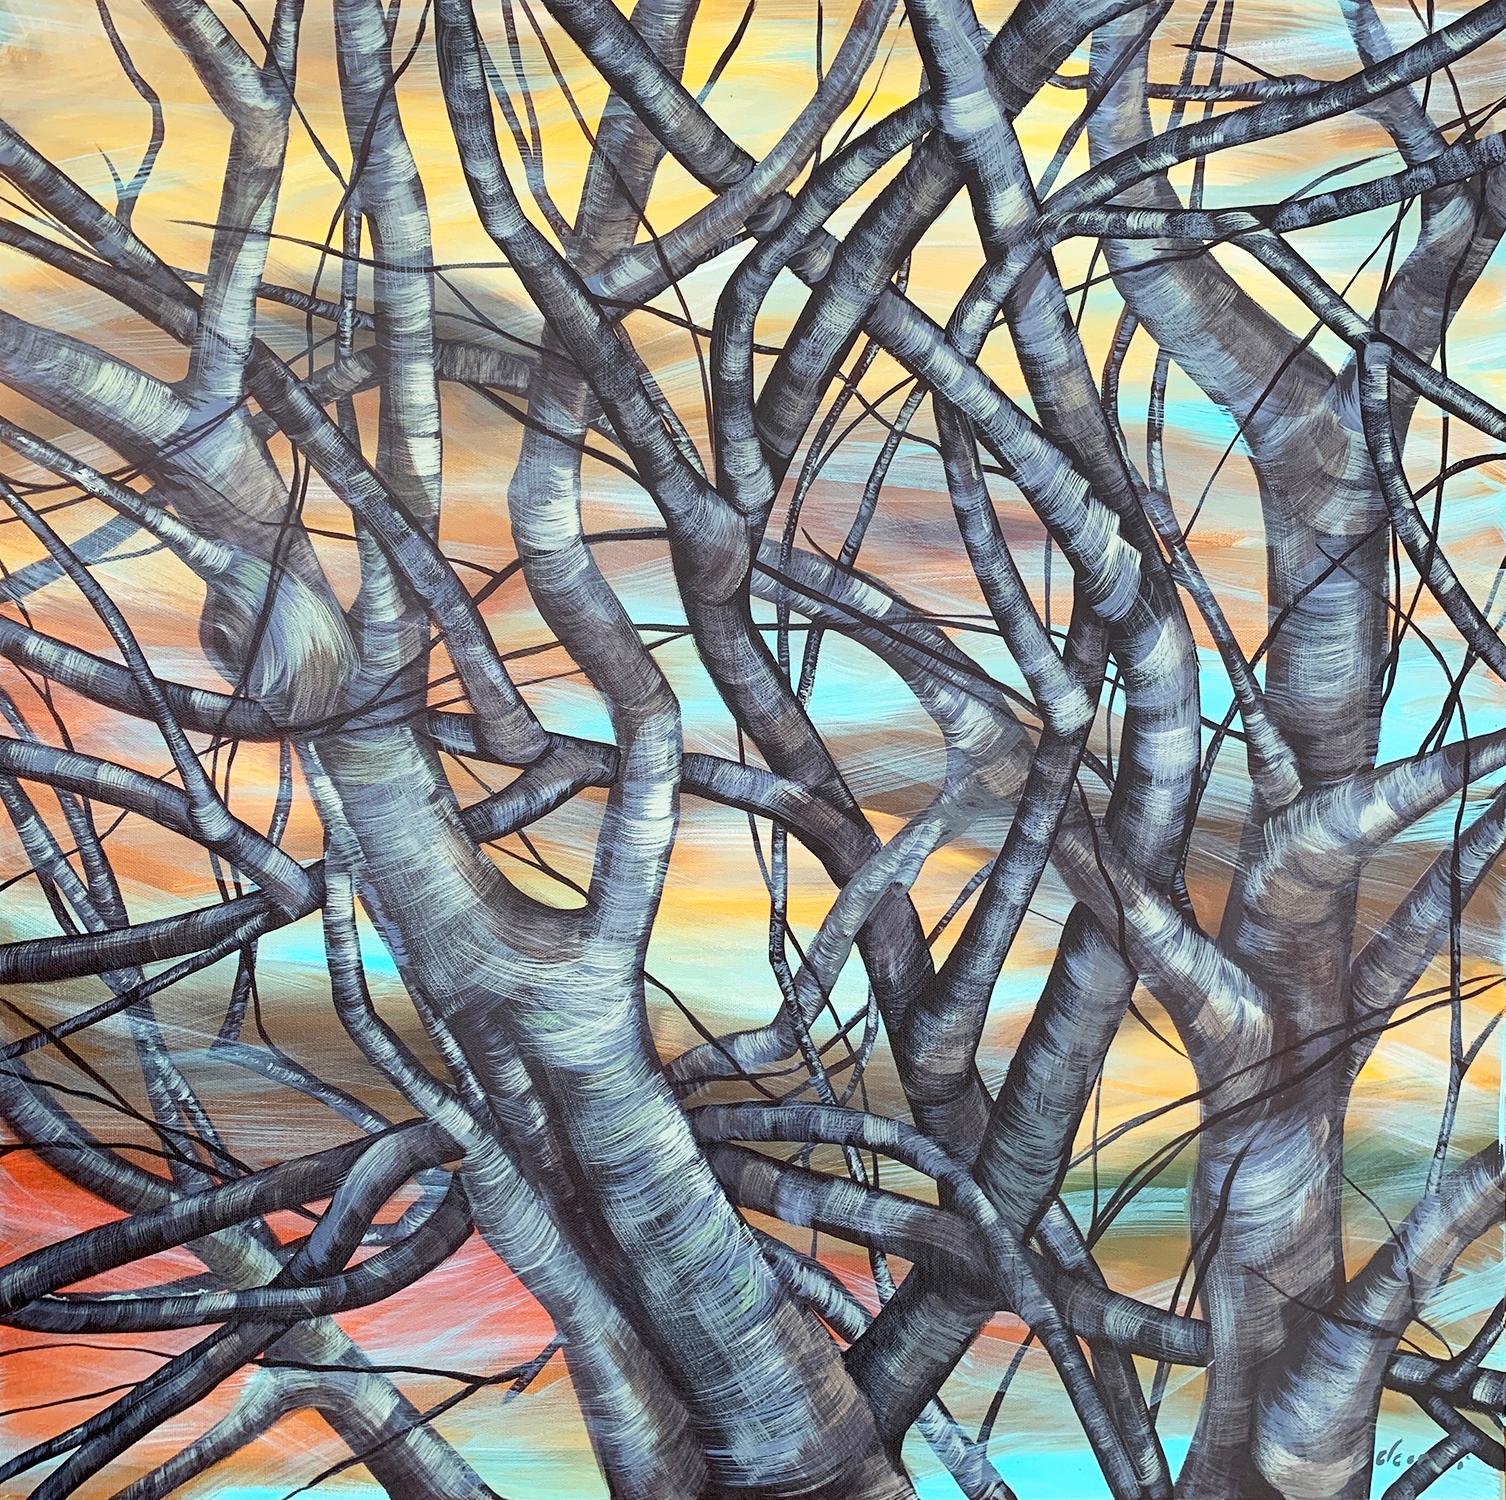 Tangled Up In Blue, Original Painting - Art by Donna Corvi